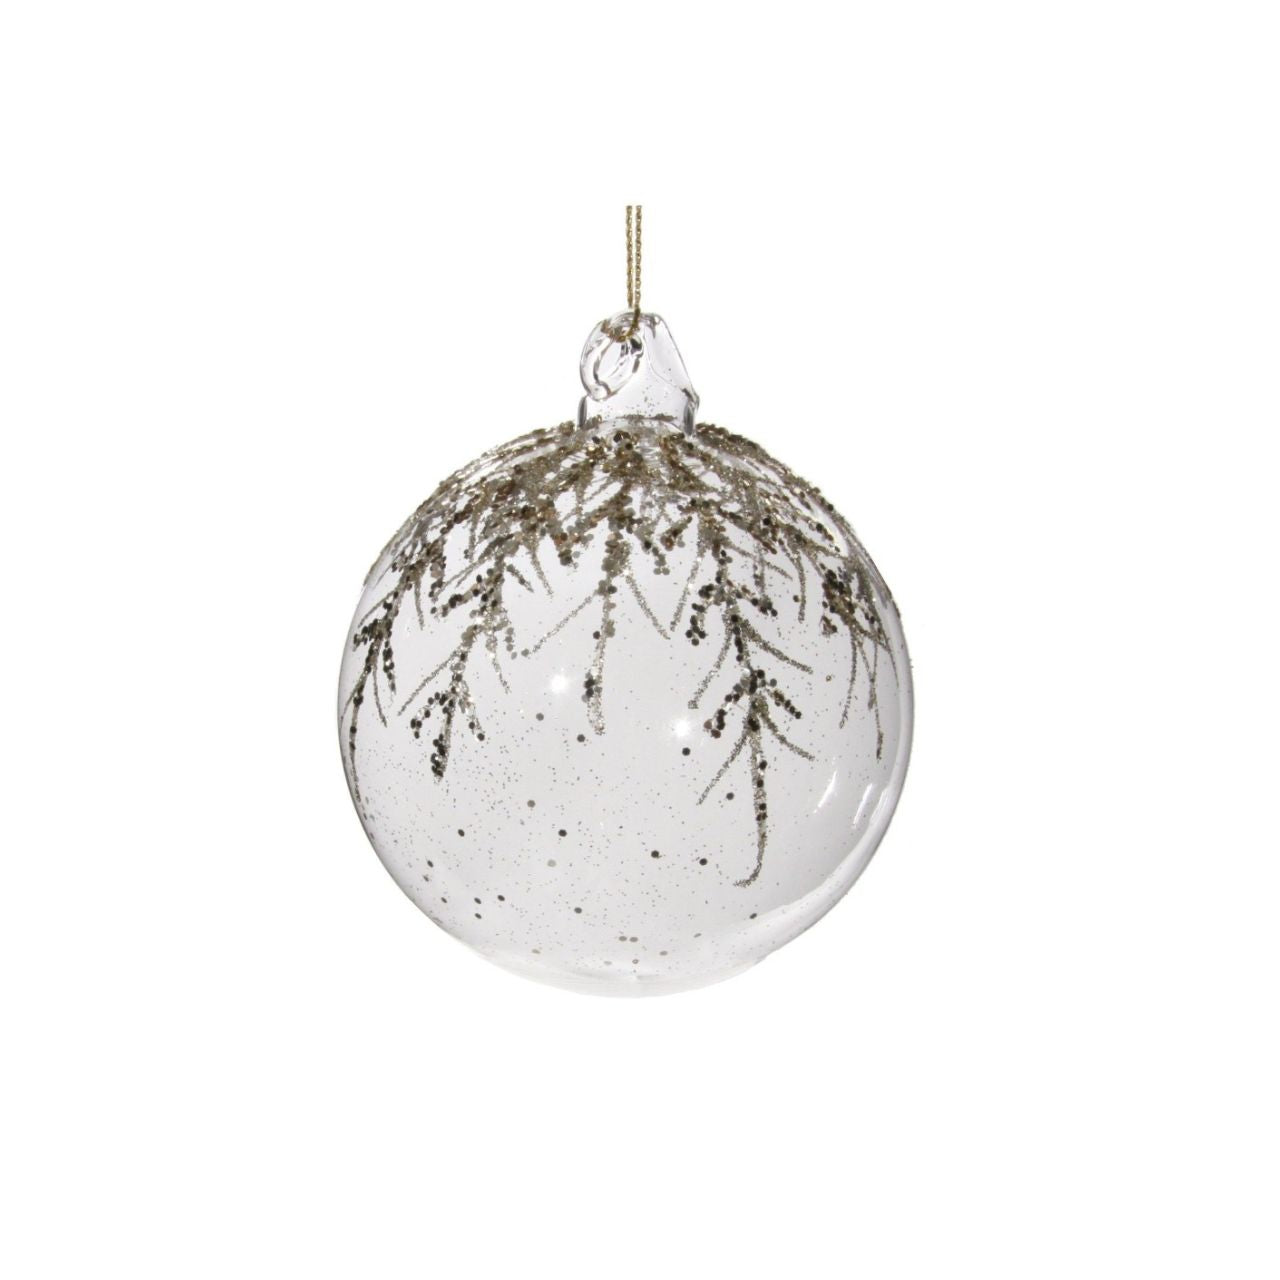 Shishi Clear Glass Ball with Glitter Fern Christmas Hanging Ornament  Browse our beautiful range of luxury festive Christmas tree decorations, baubles & ornaments for your tree this Christmas.